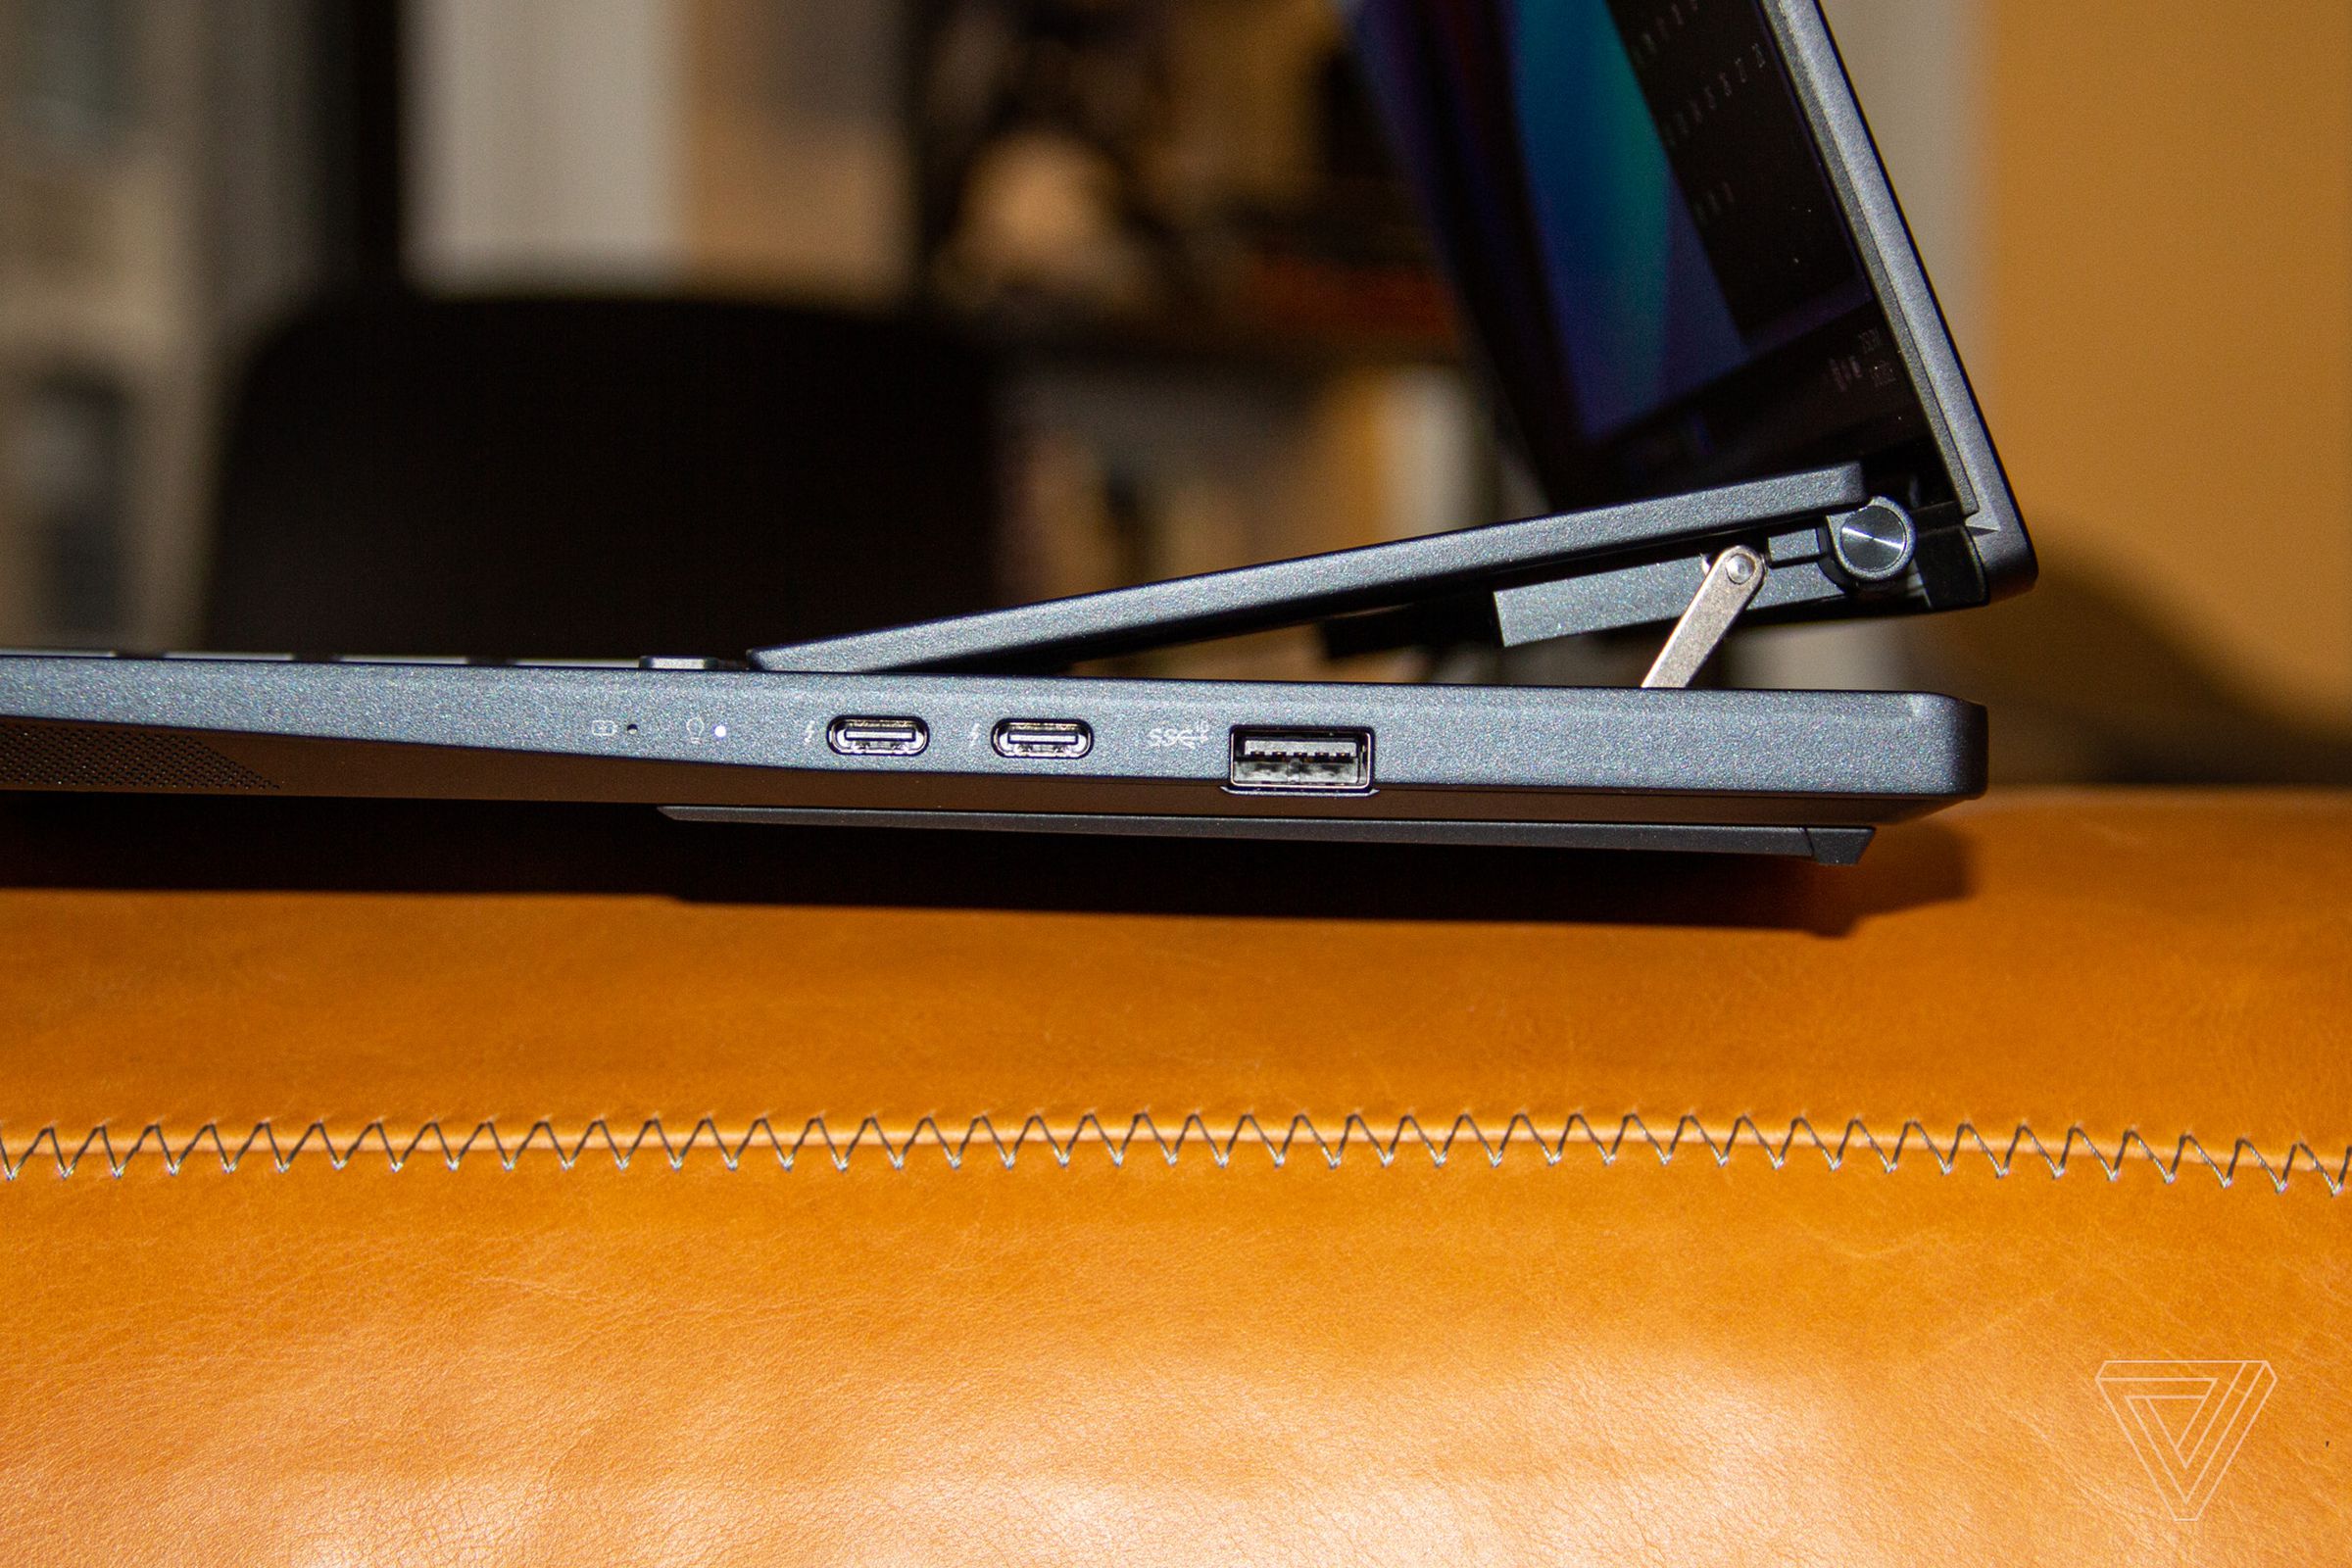 The ports on the right side of the Asus Zenbook Pro Duo 14 OLED.